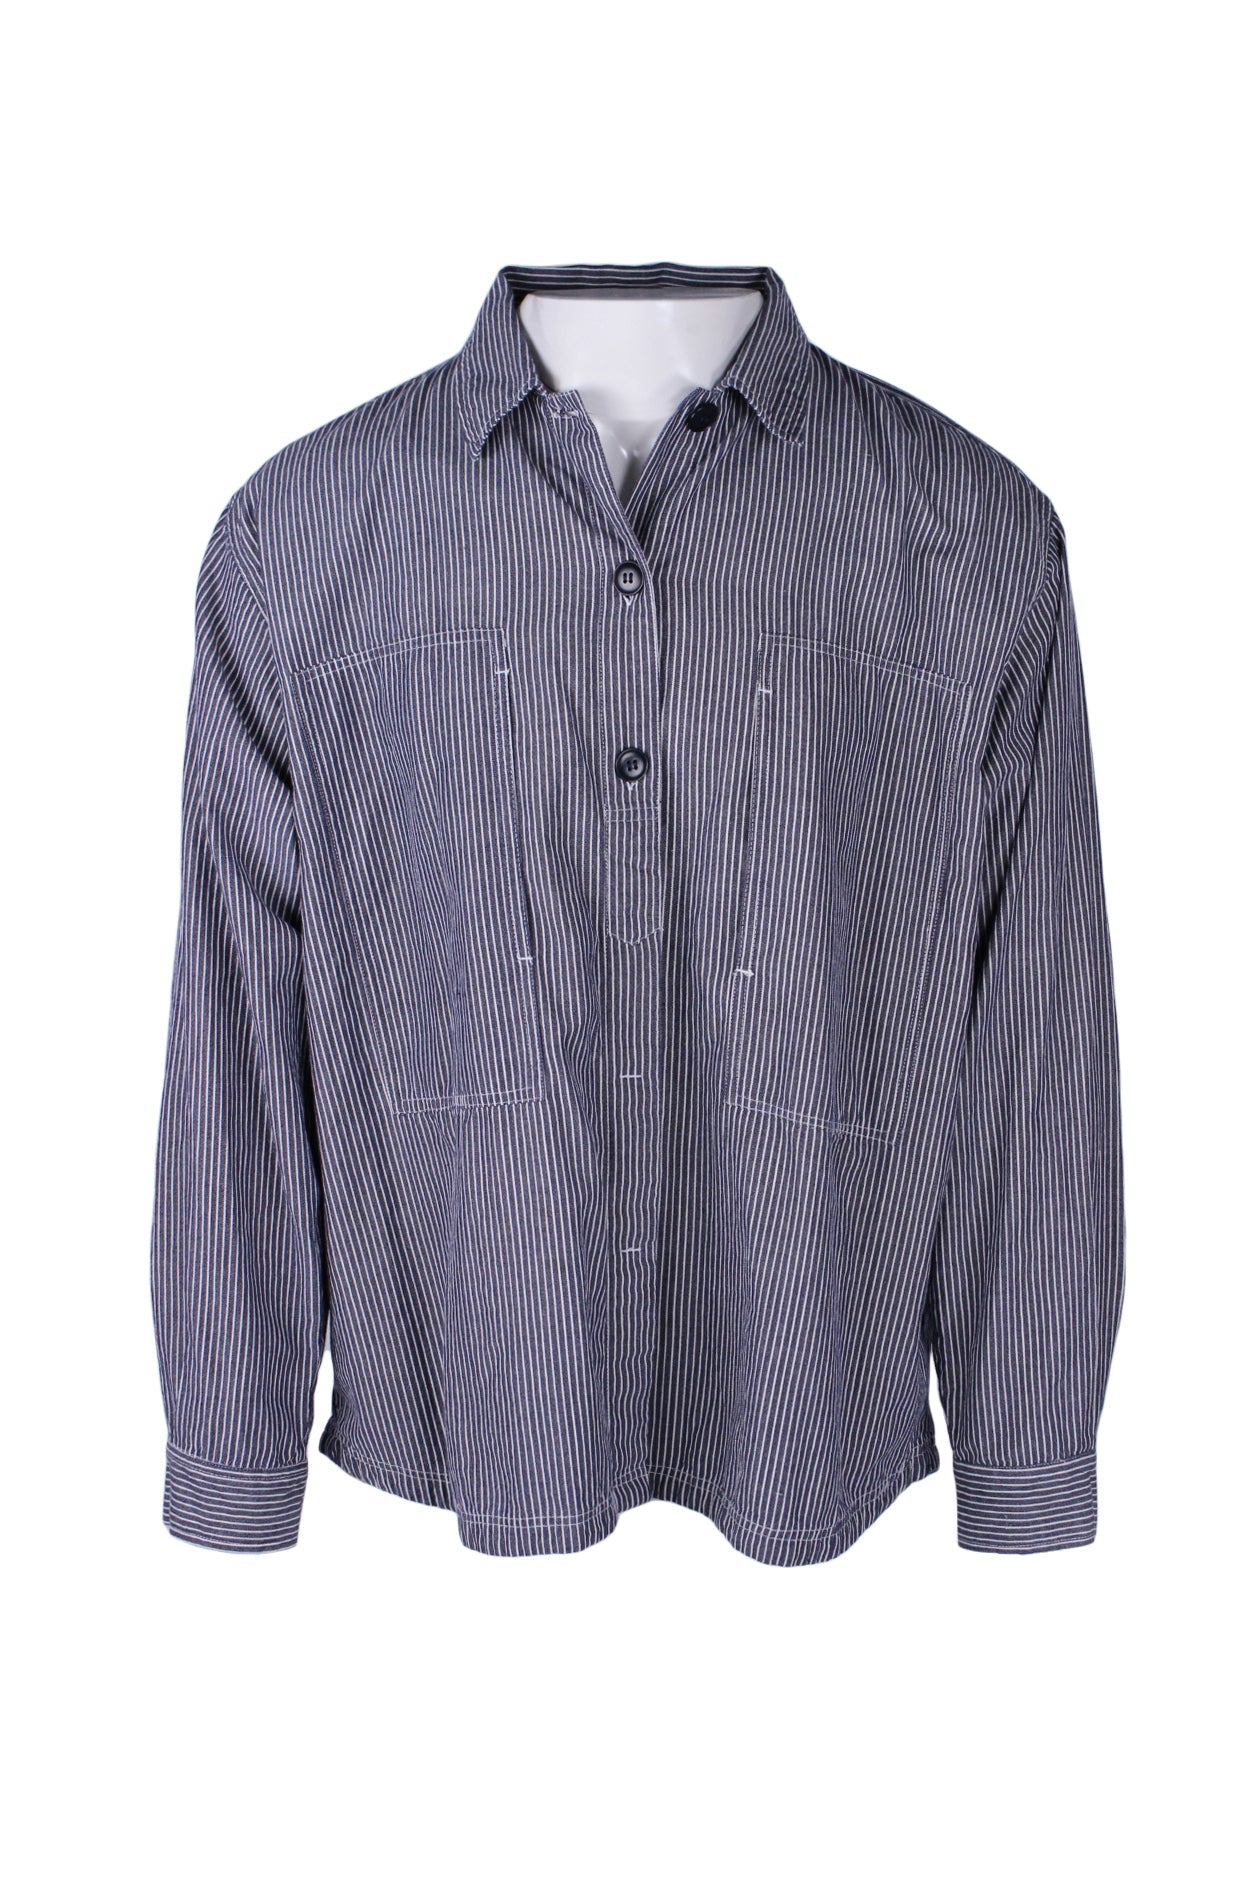 front angle le mont s'michel indigo and white long sleeve workwear inspired striped shirt on masculine mannequin torso featuring oversized vertical chest pockets with decorative topstitching and partially concealed front button closure. 